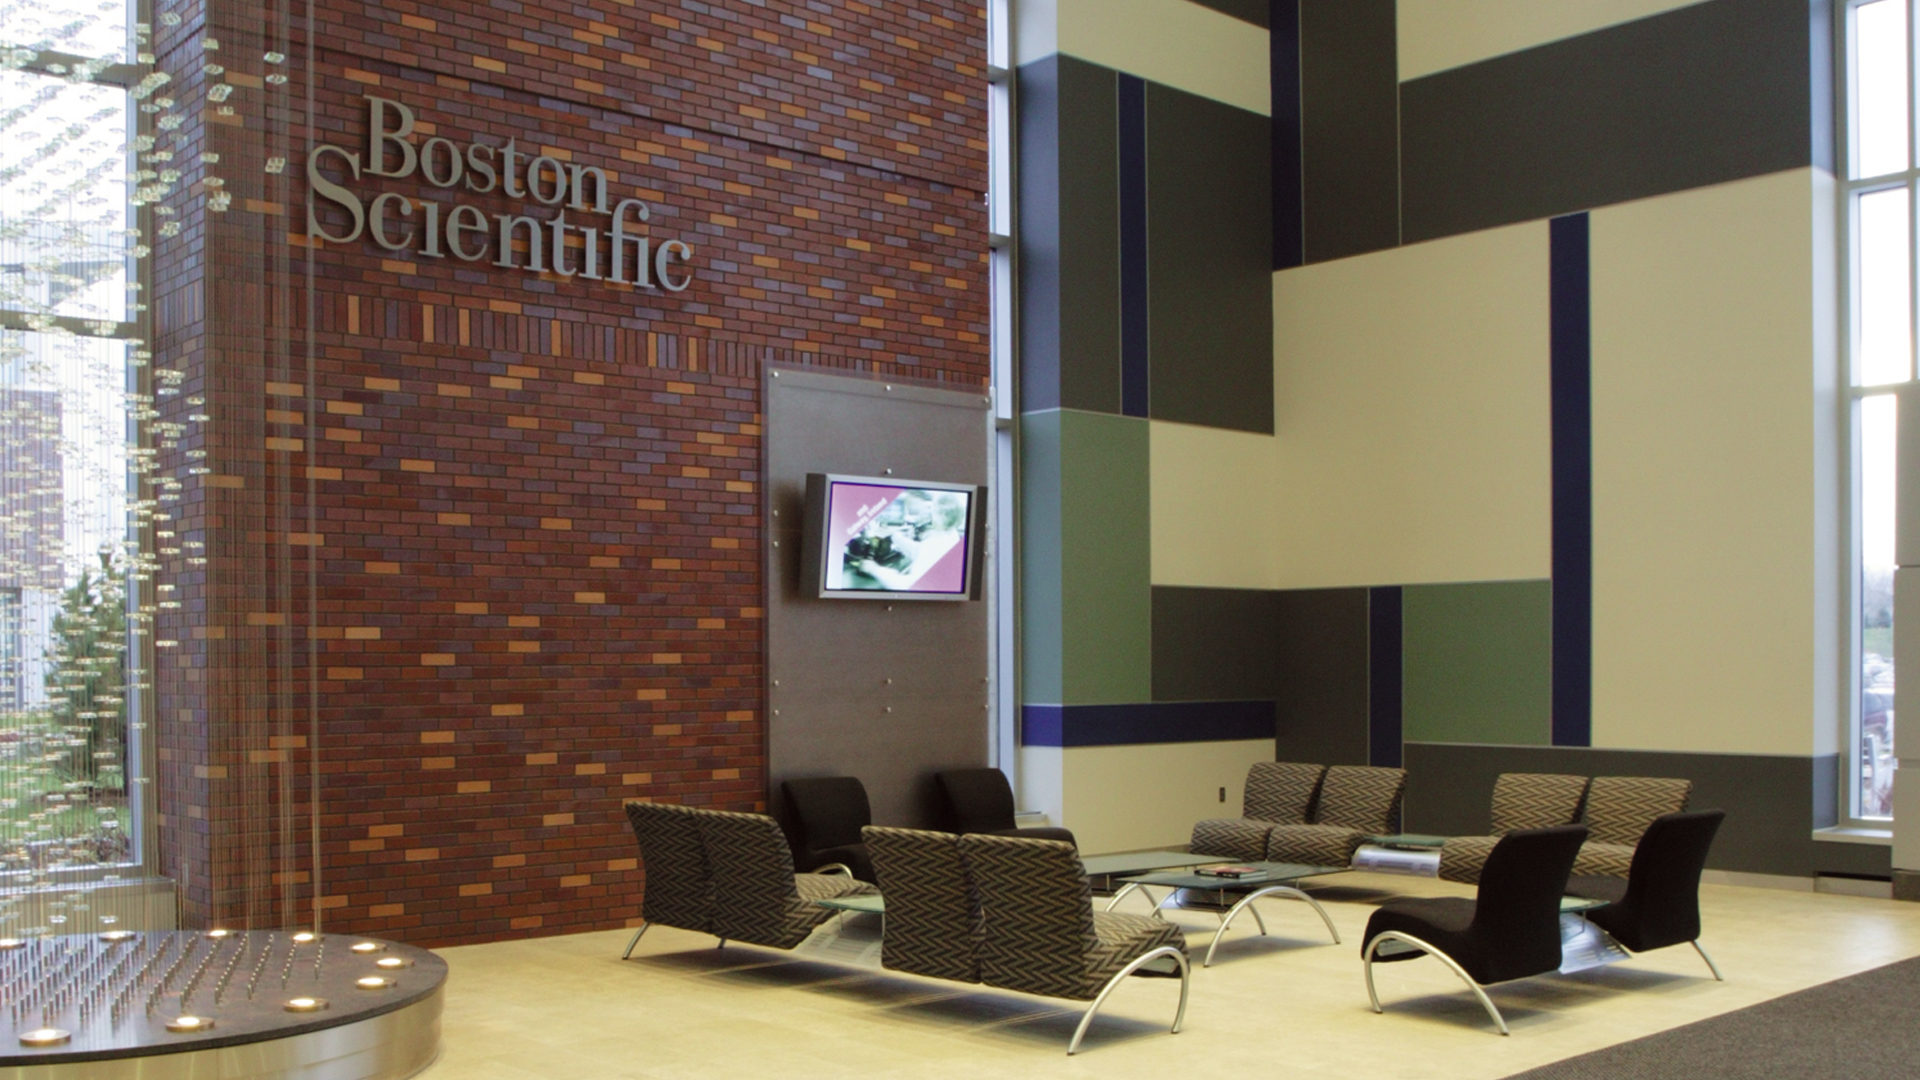 Boston Scientific Weaver Lake Phase III Expansion High Tech Manufacturing Interior Lobby Seating Area